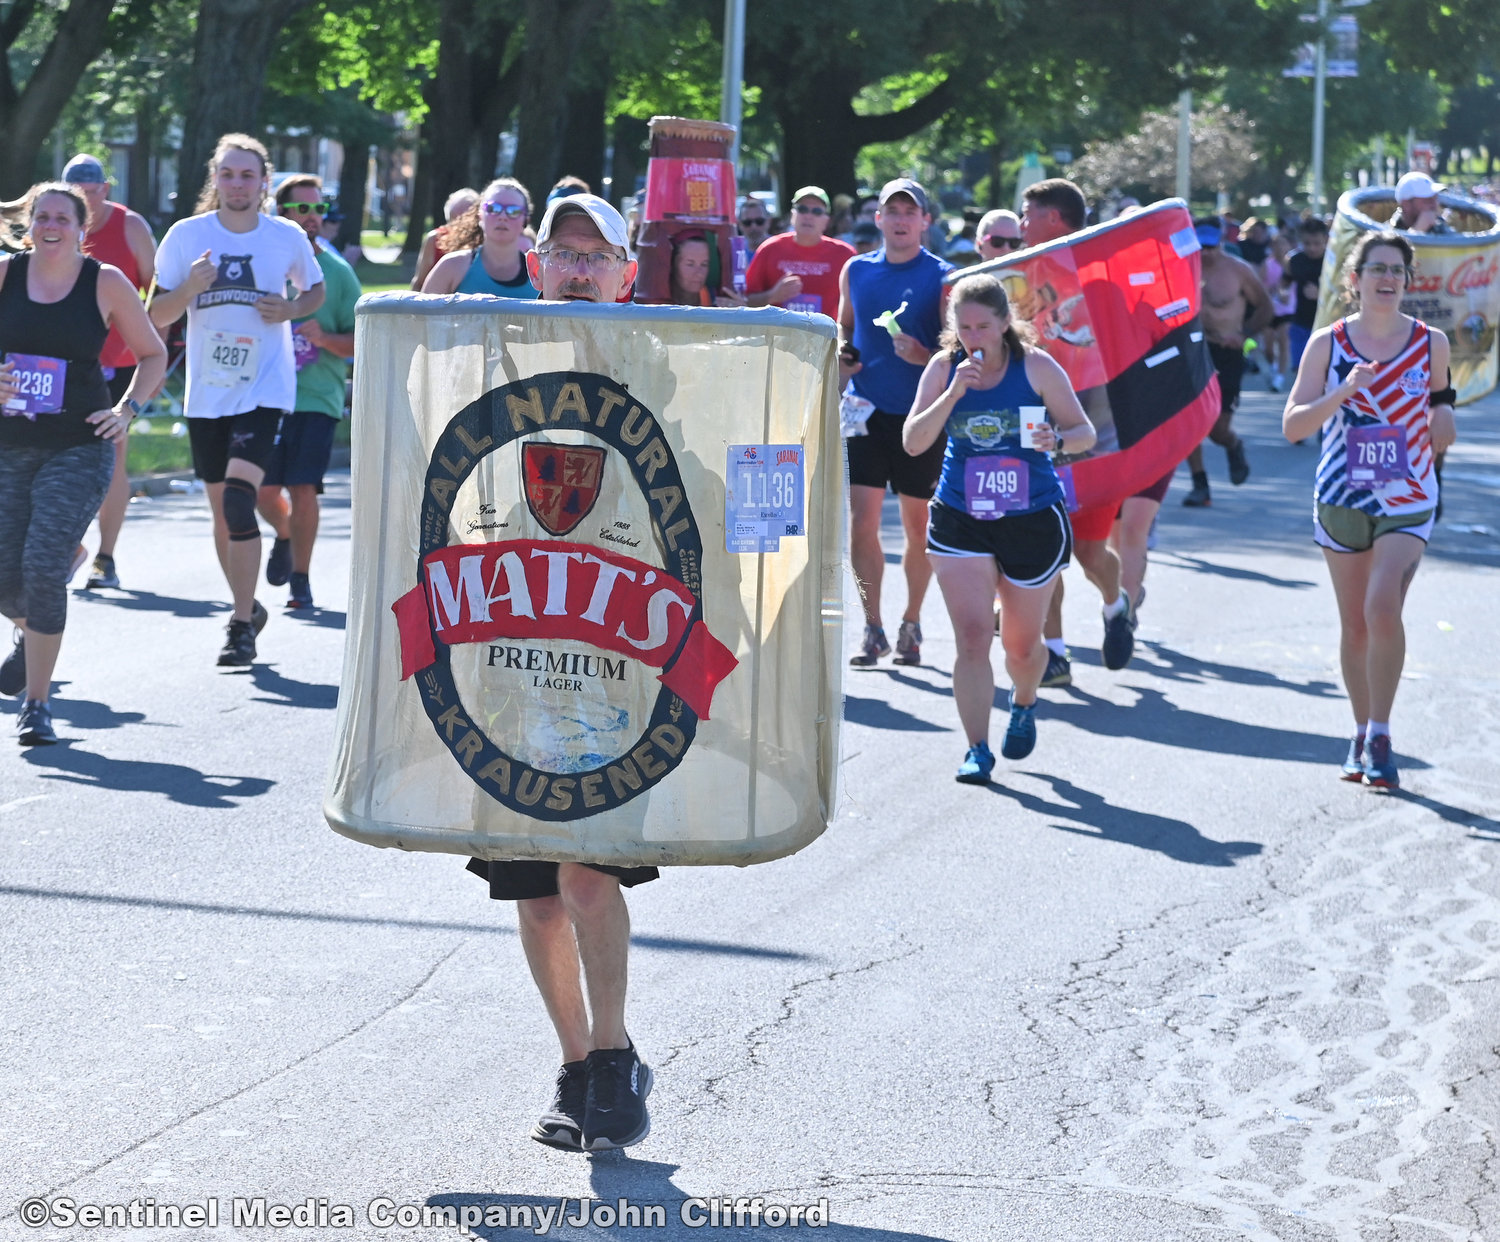 15k runner, William Moody of Newport, NY, on Memorial Parkway during the 45th Boilermaker Road Race.